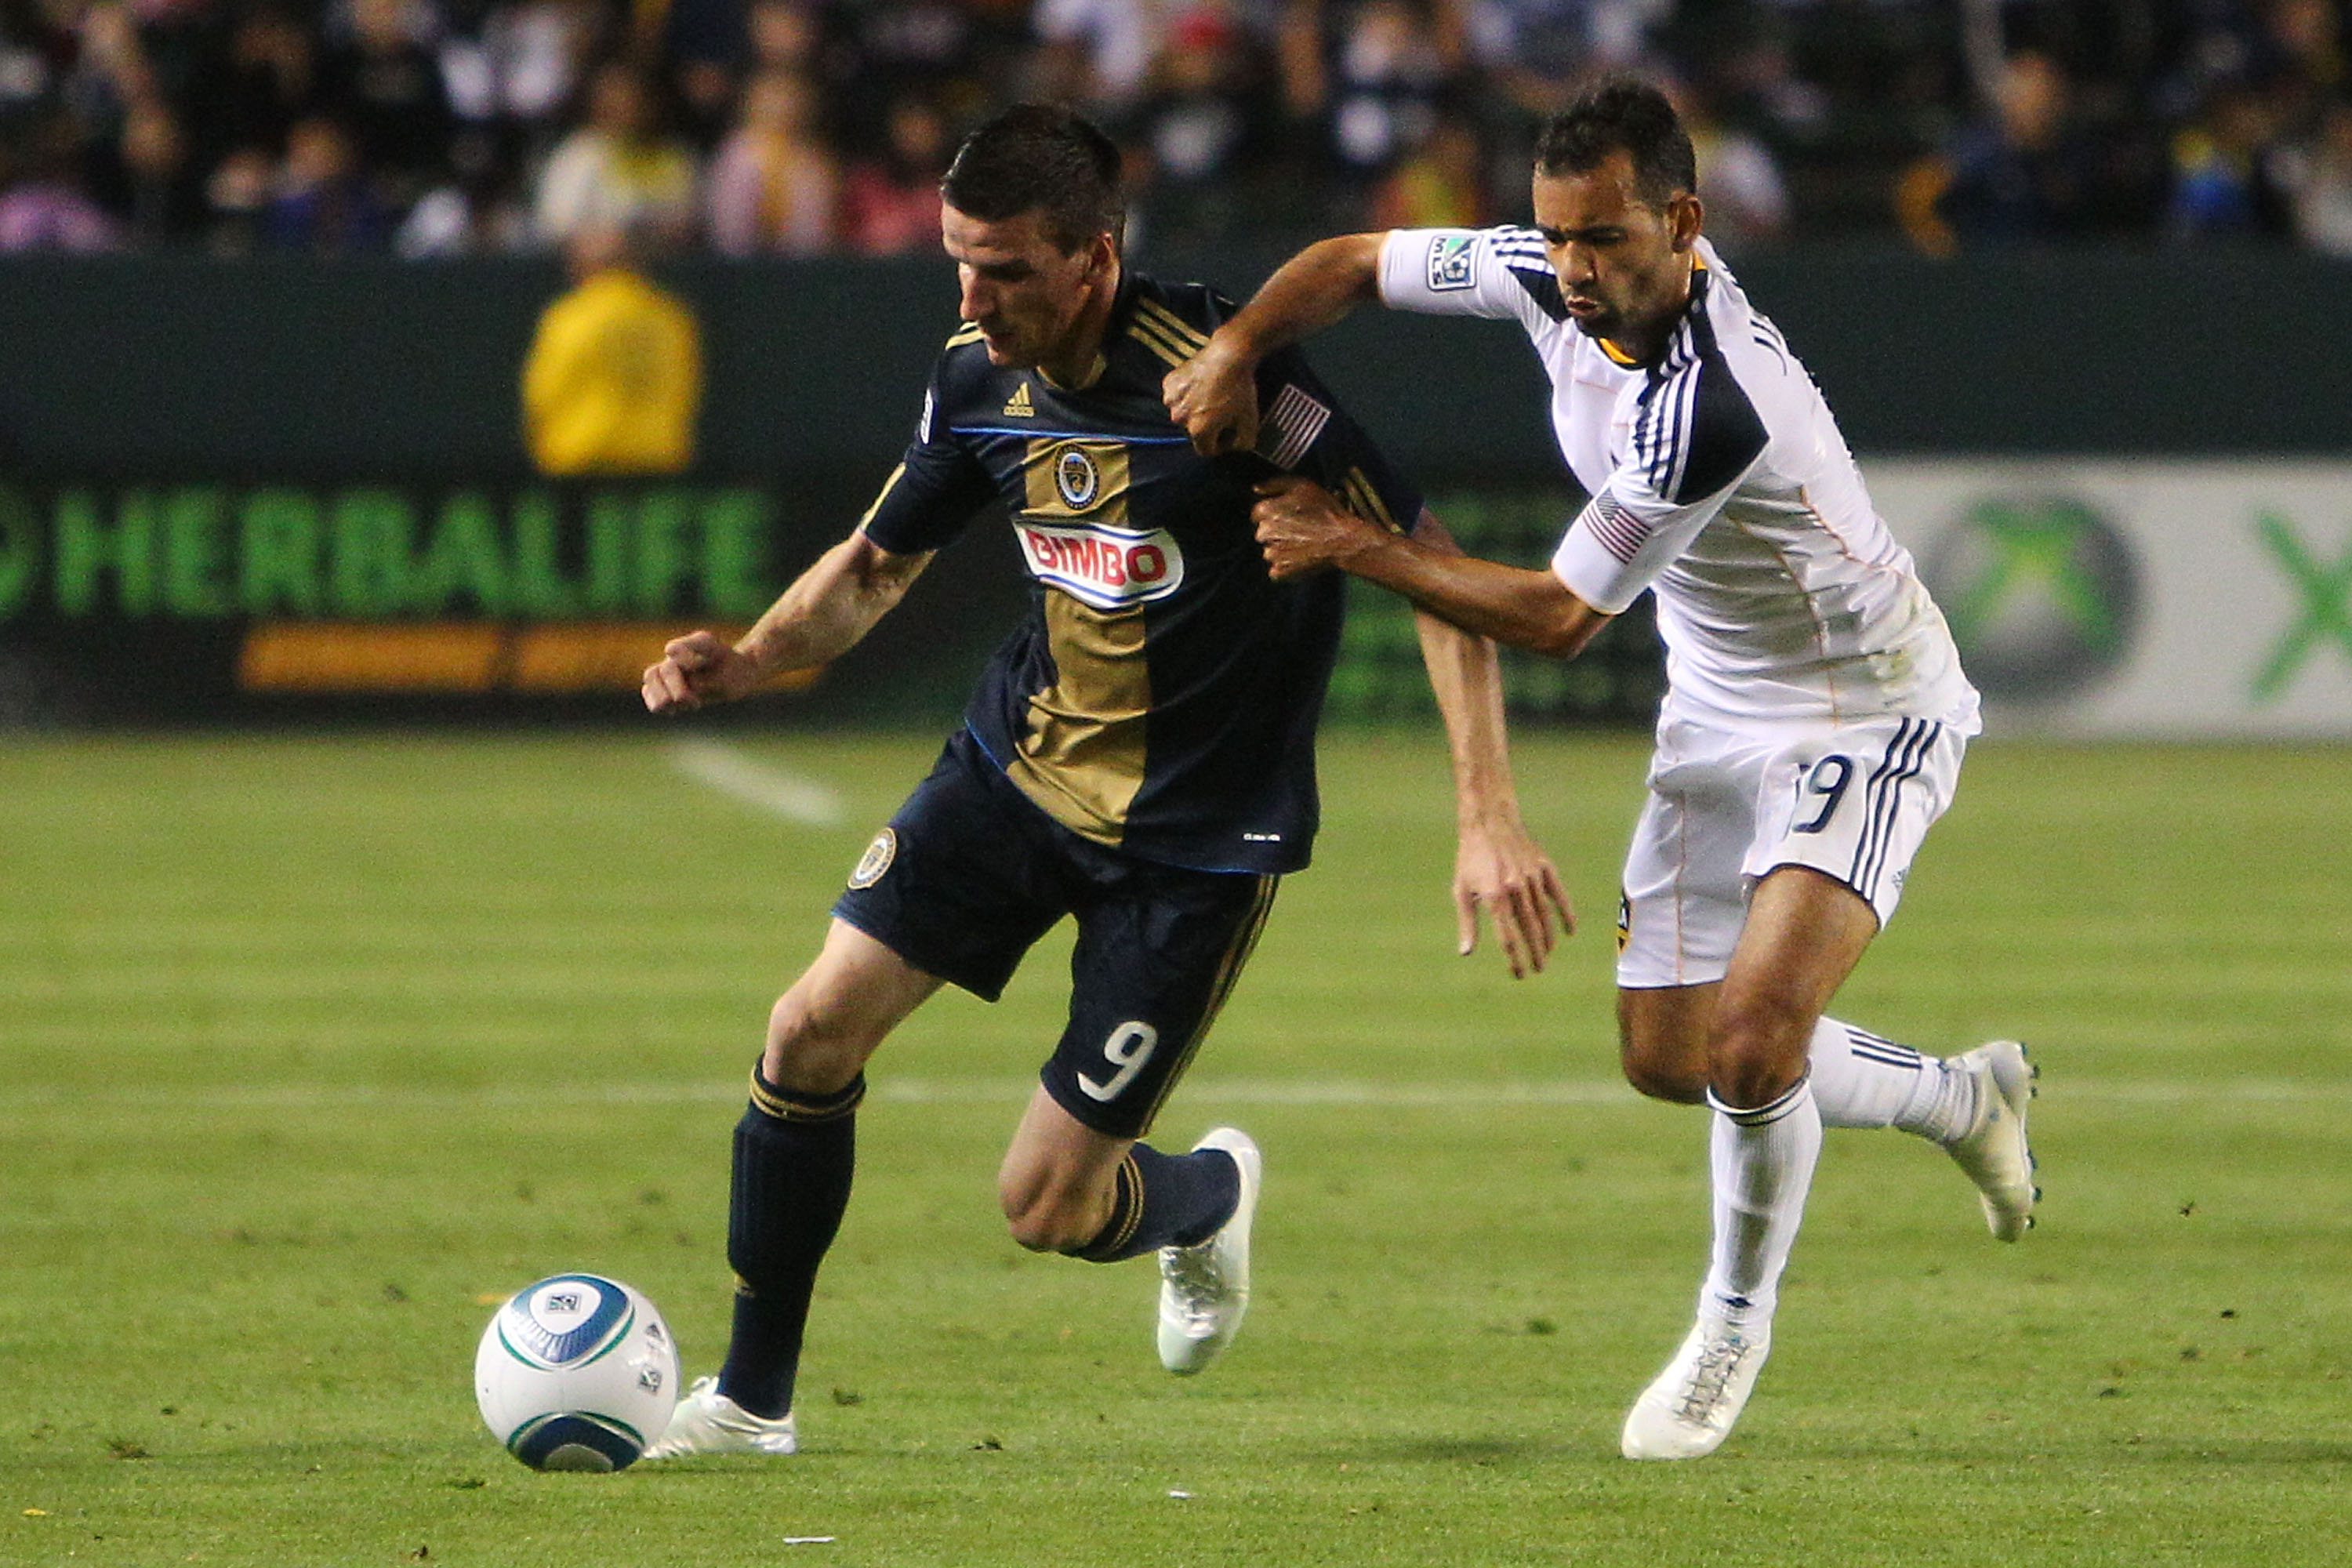 CARSON, CA - APRIL 02:  Sebastien Le Toux #9 of the Philadelphia Union defends against Juninho #19 of the Los Angeles Galaxy during the match at The Home Depot Center on April 2, 2011 in Carson, California.  (Photo by Joe Scarnici/Getty Images)